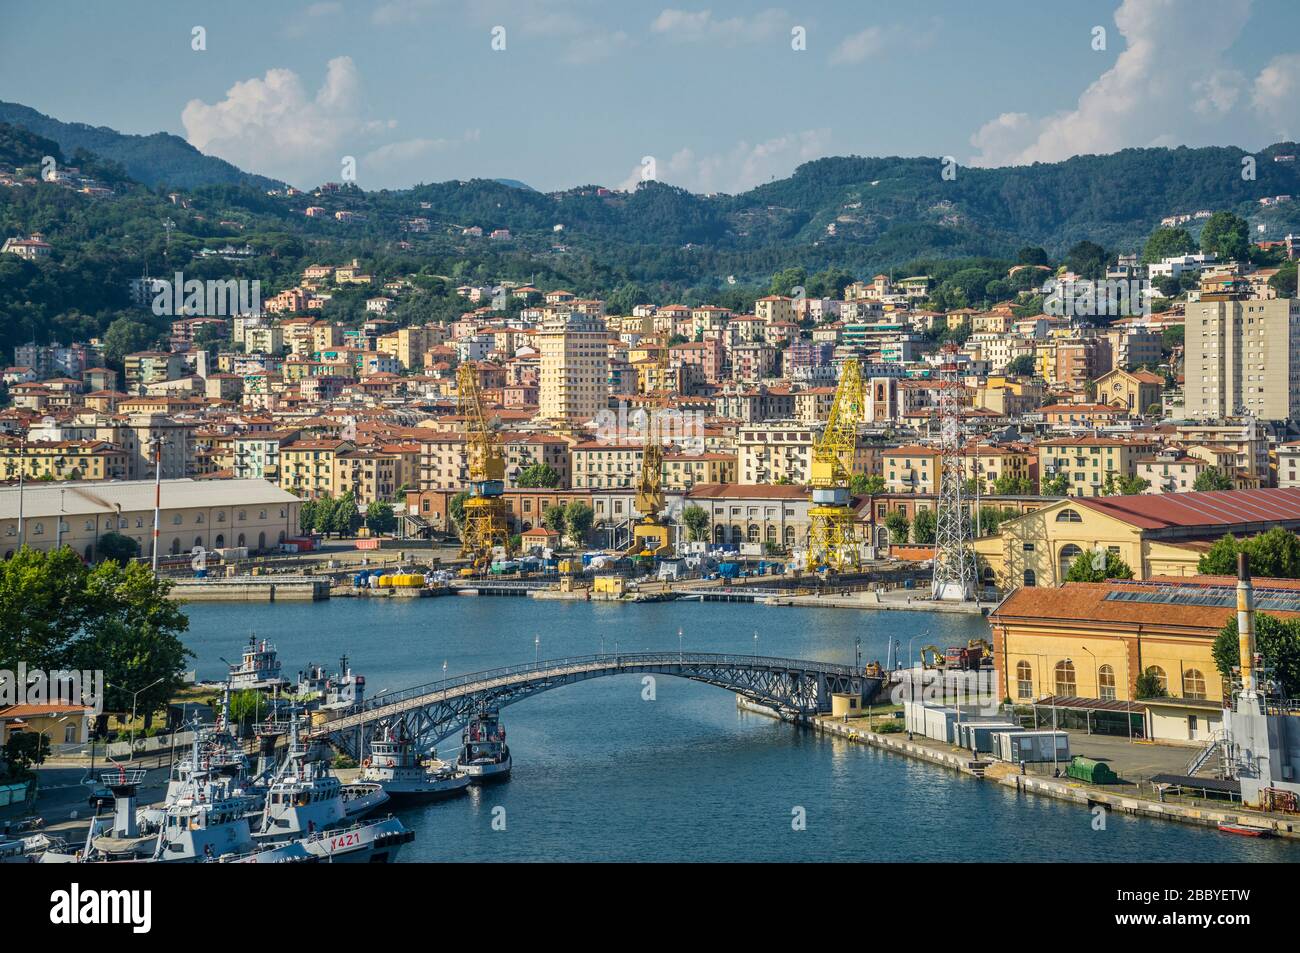 view of the Navy Base in the harbour of La Spezia, Liguria, Italy Stock Photo